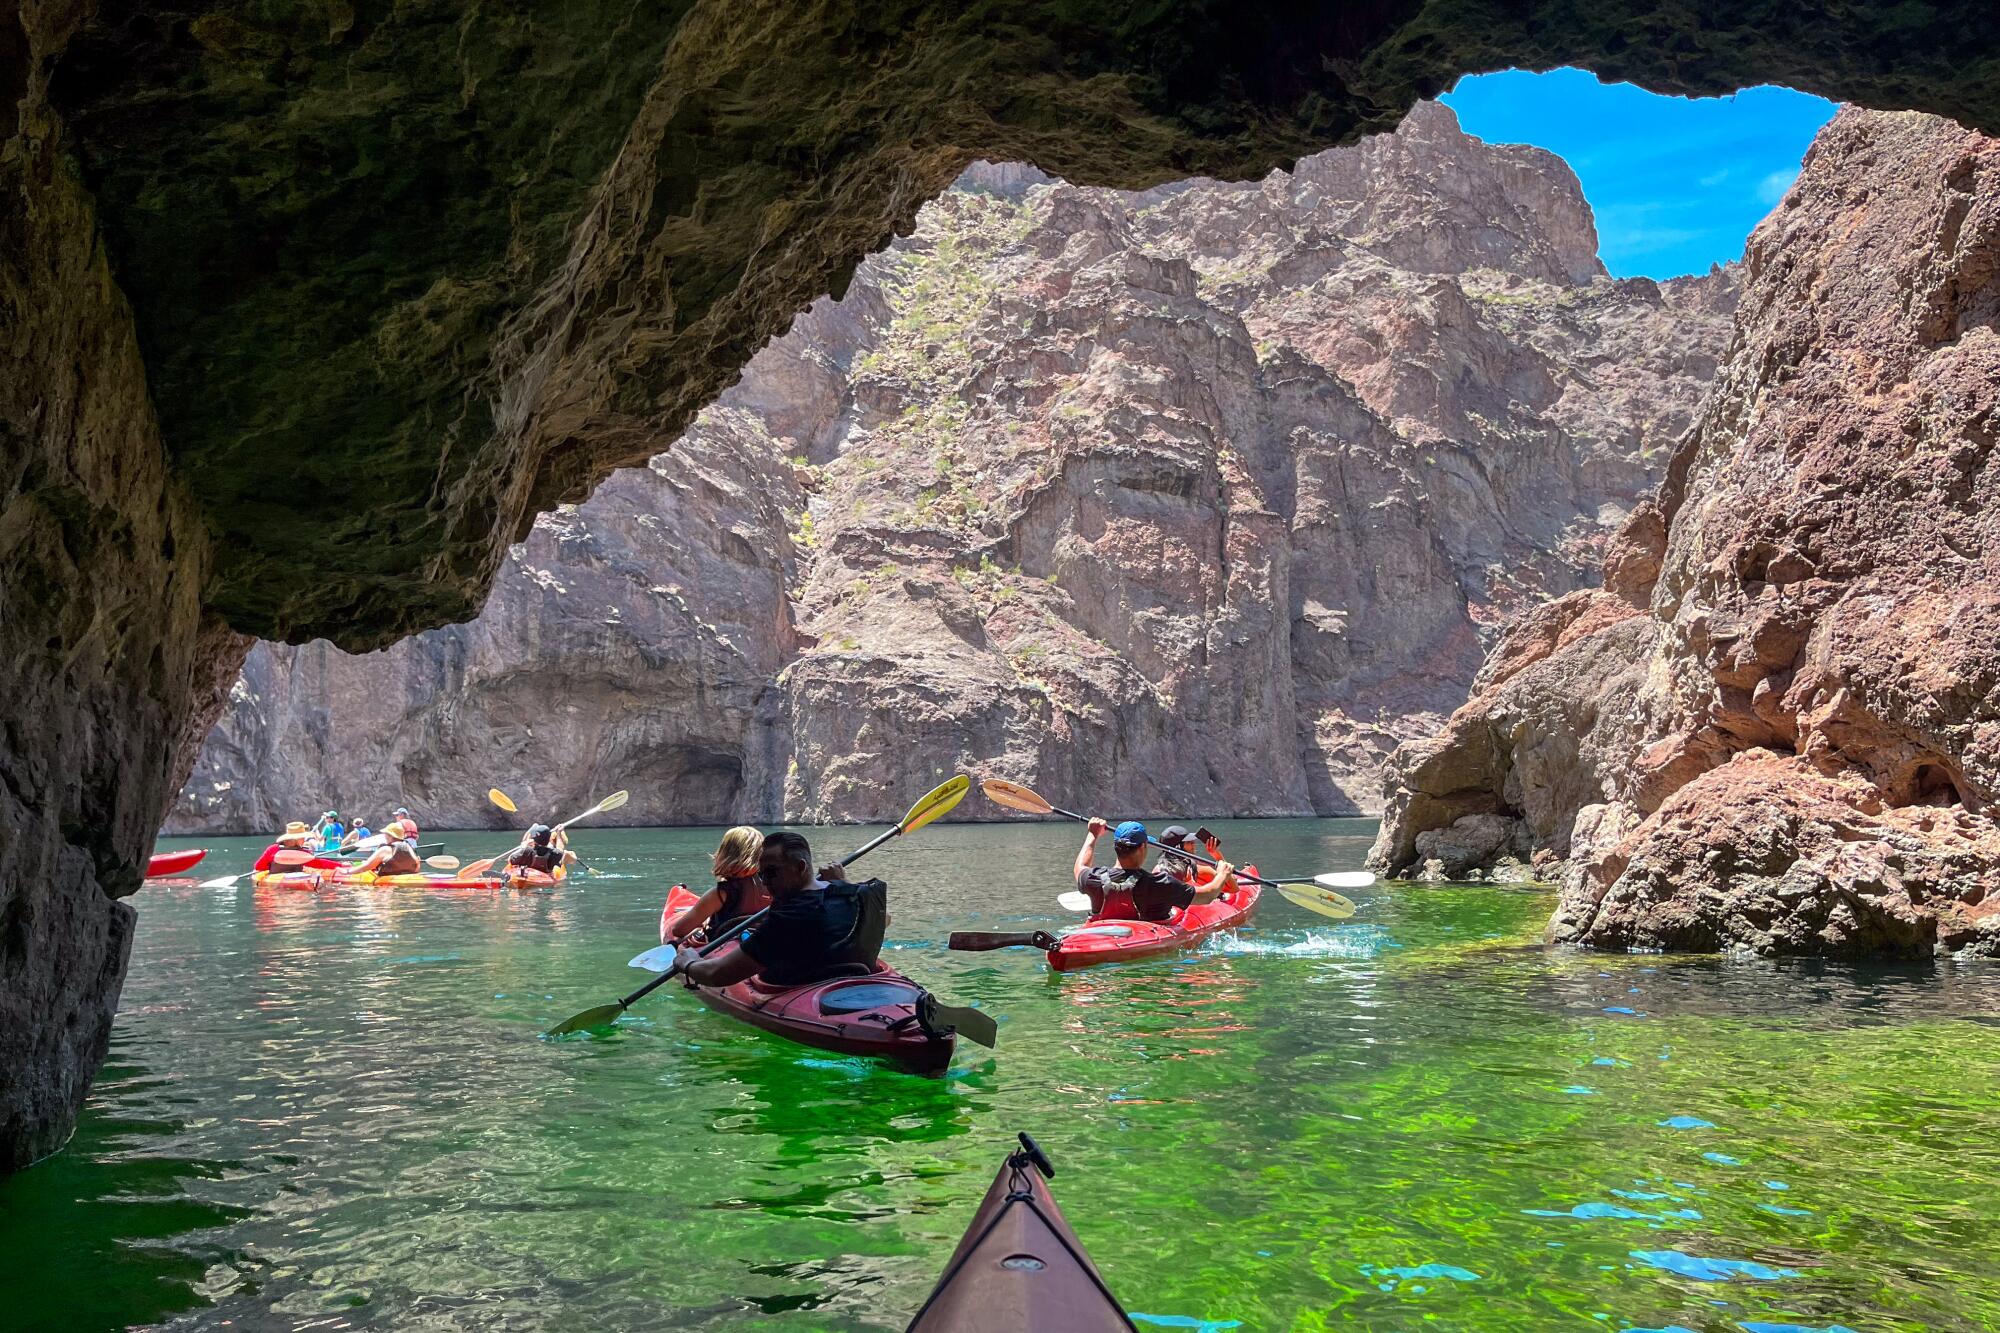 Groups of kayakers in emerald-green water, surrounded by rocky cliffs.